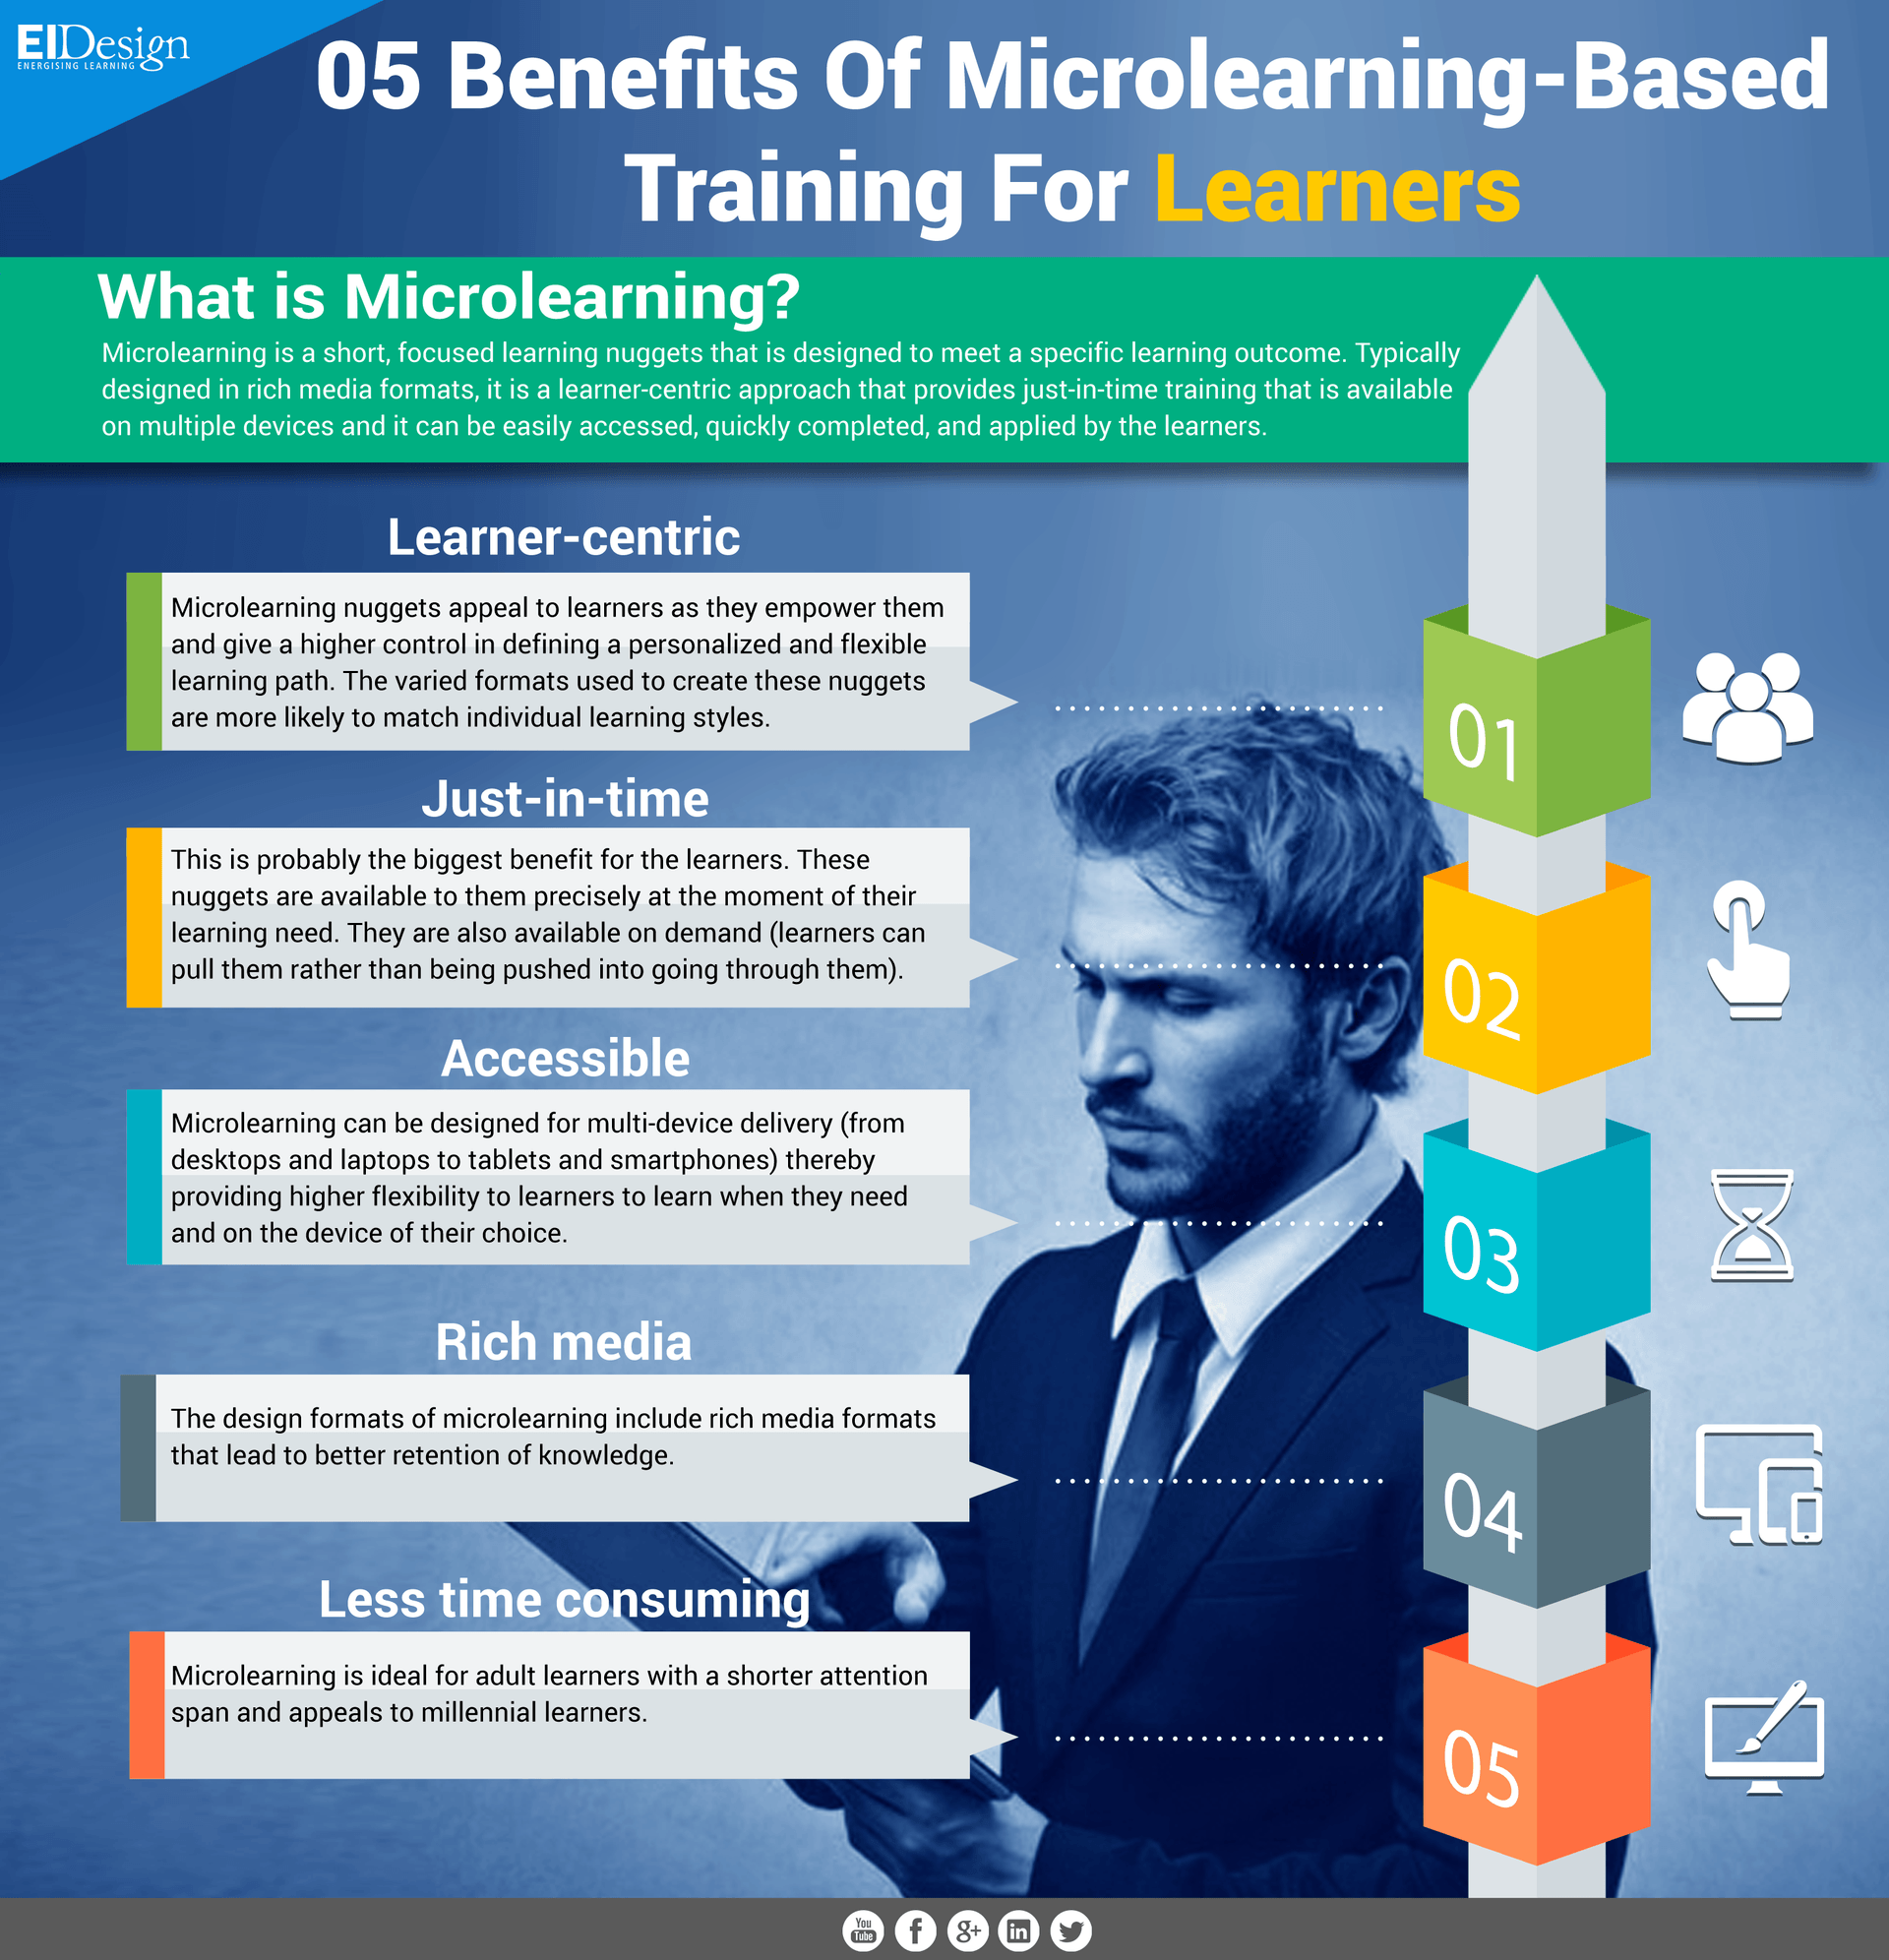 5 Benefits of Microlearning Based Training for Learners Infographic